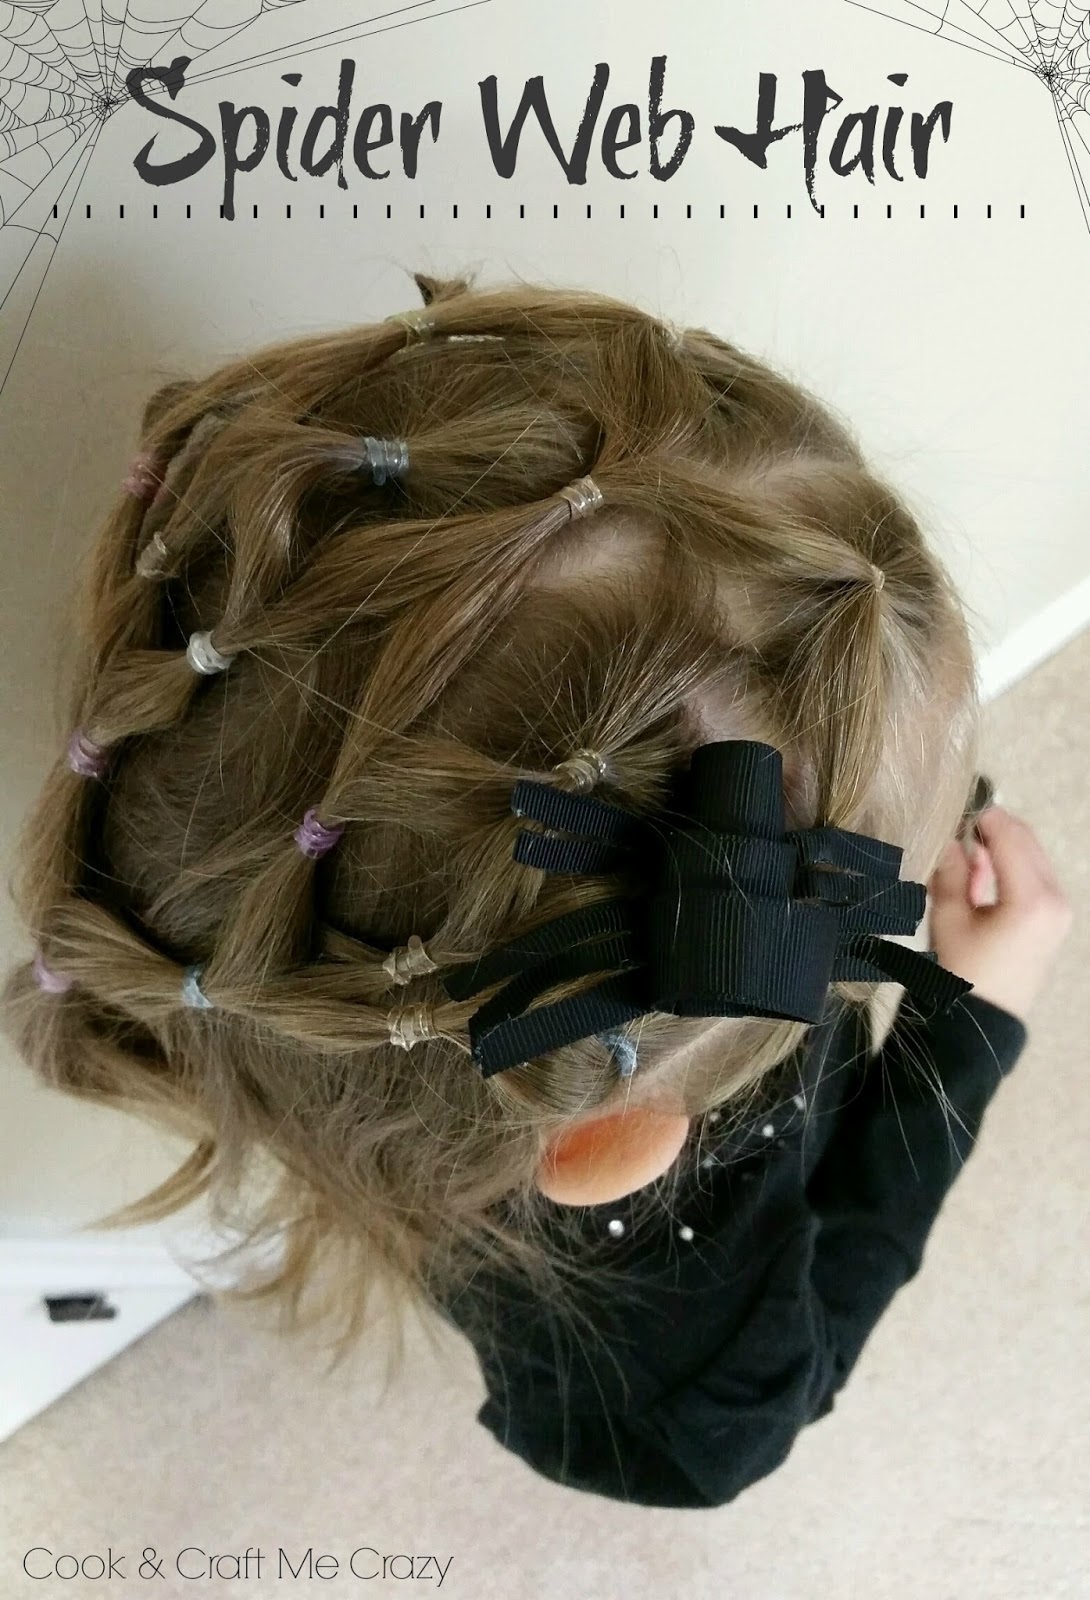 Cook and Craft Me Crazy: Spider Web Hair!